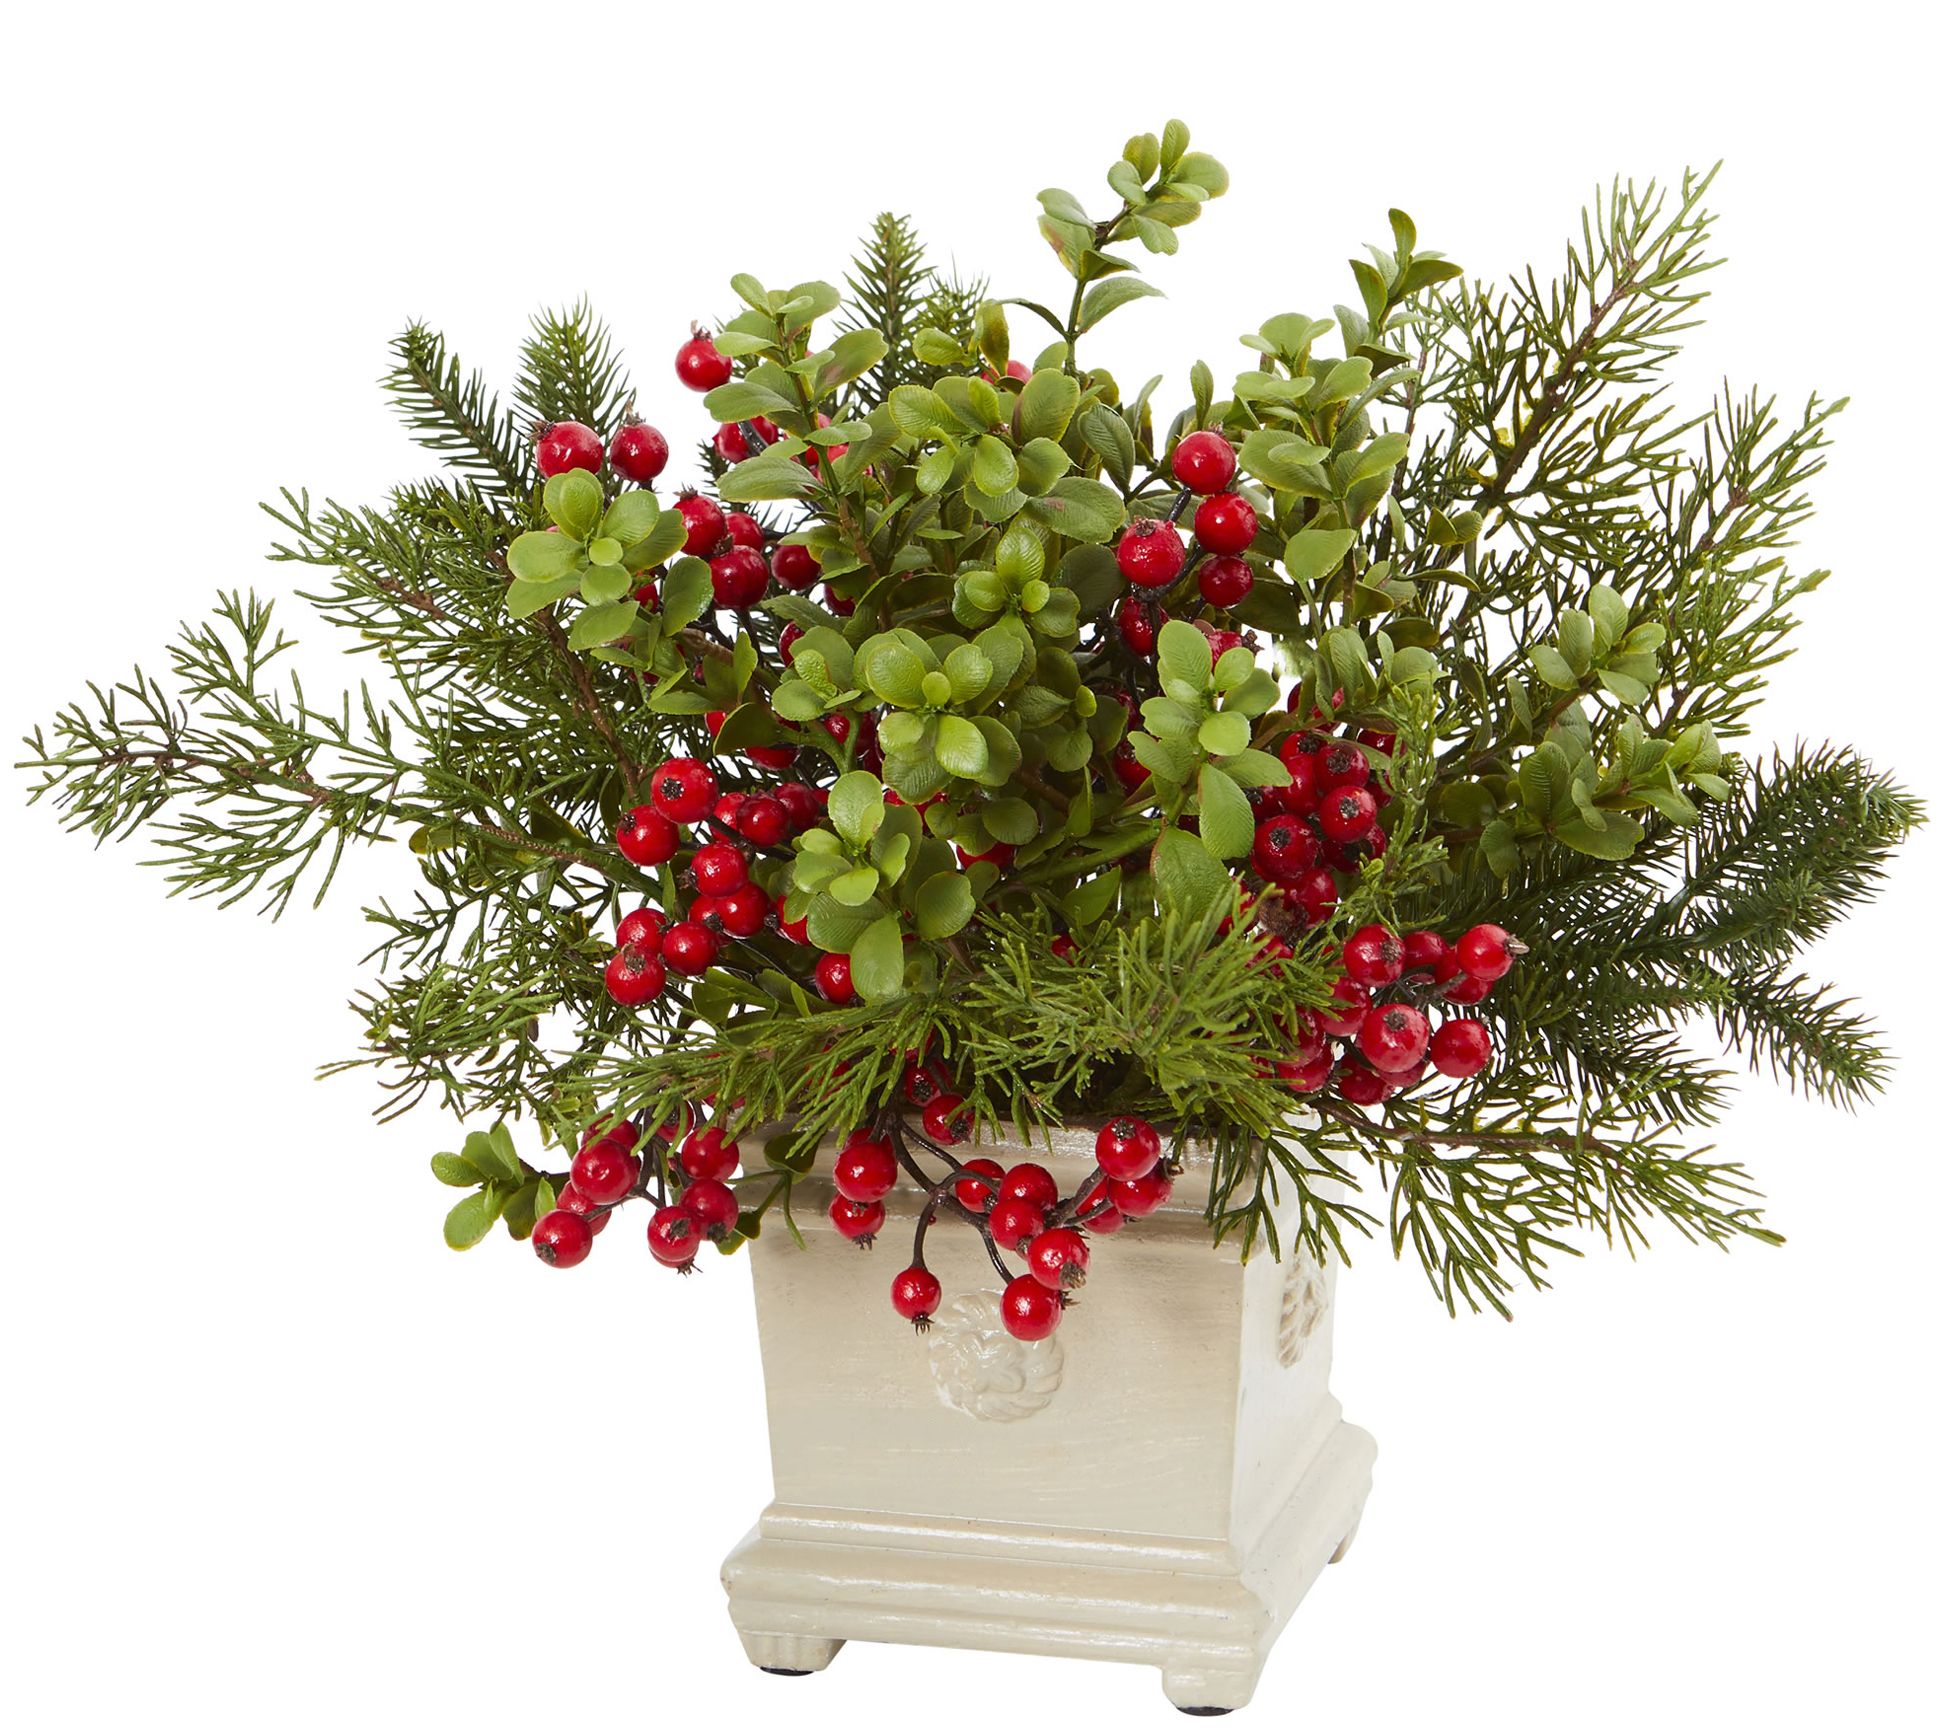 Holiday Berry and Pine Arrangement by Nearly Natural - QVC.com